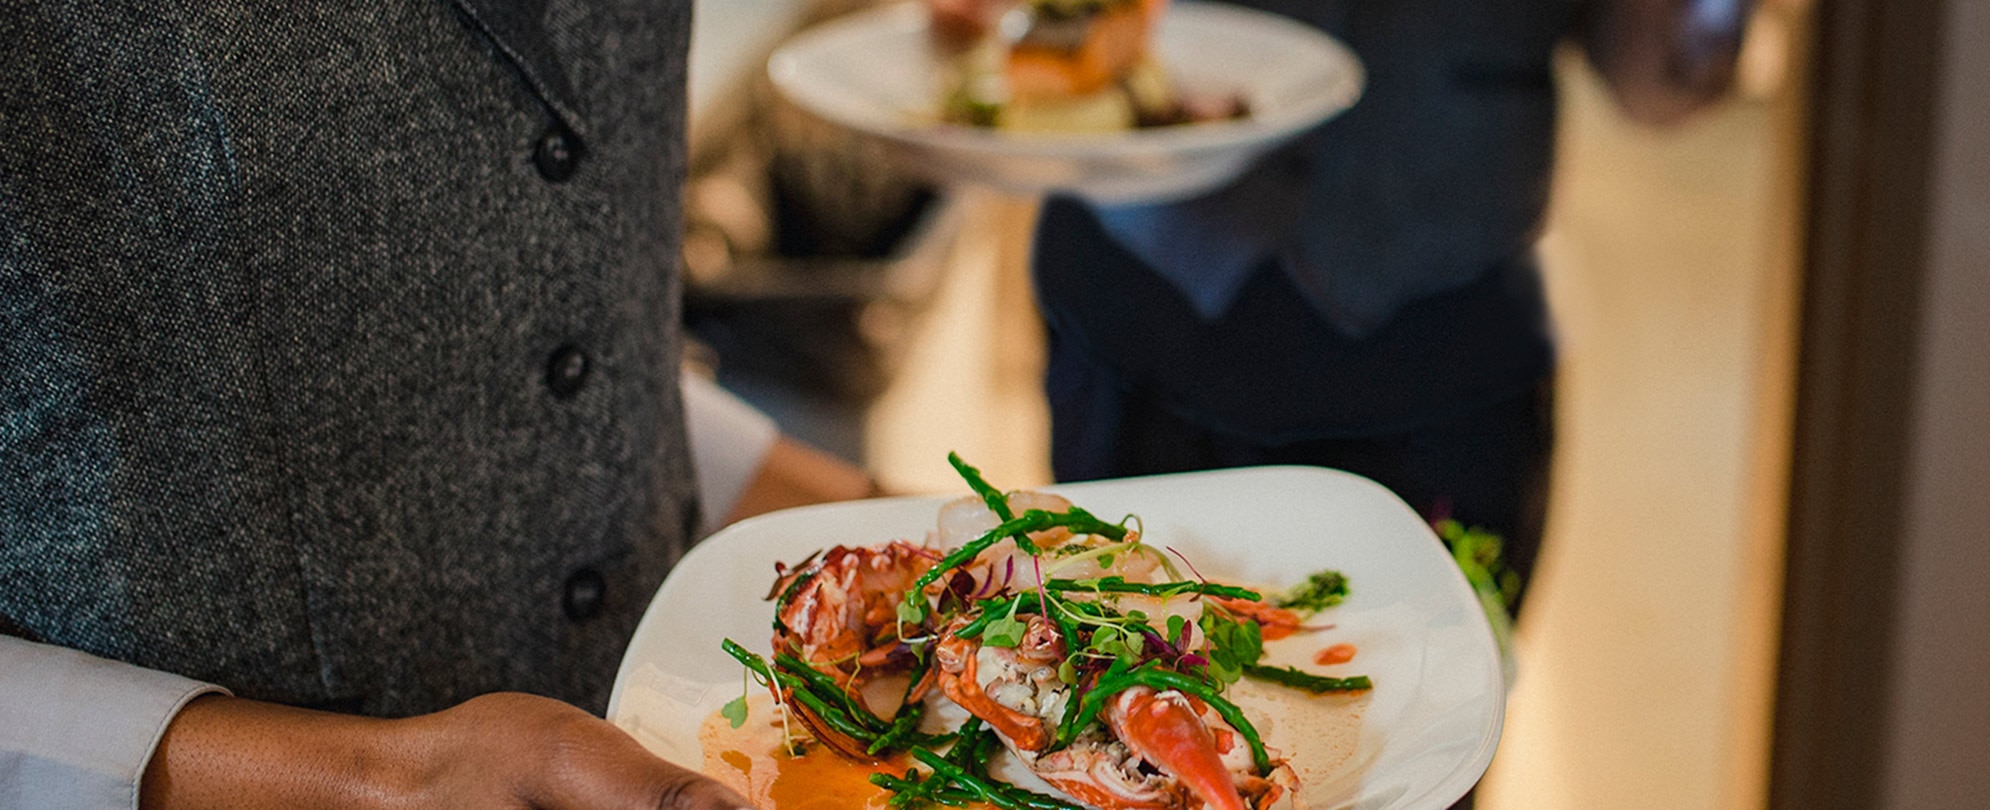 Close-up shot of a waiter holding a plate of seafood and vegetables, about to bring it to a table.